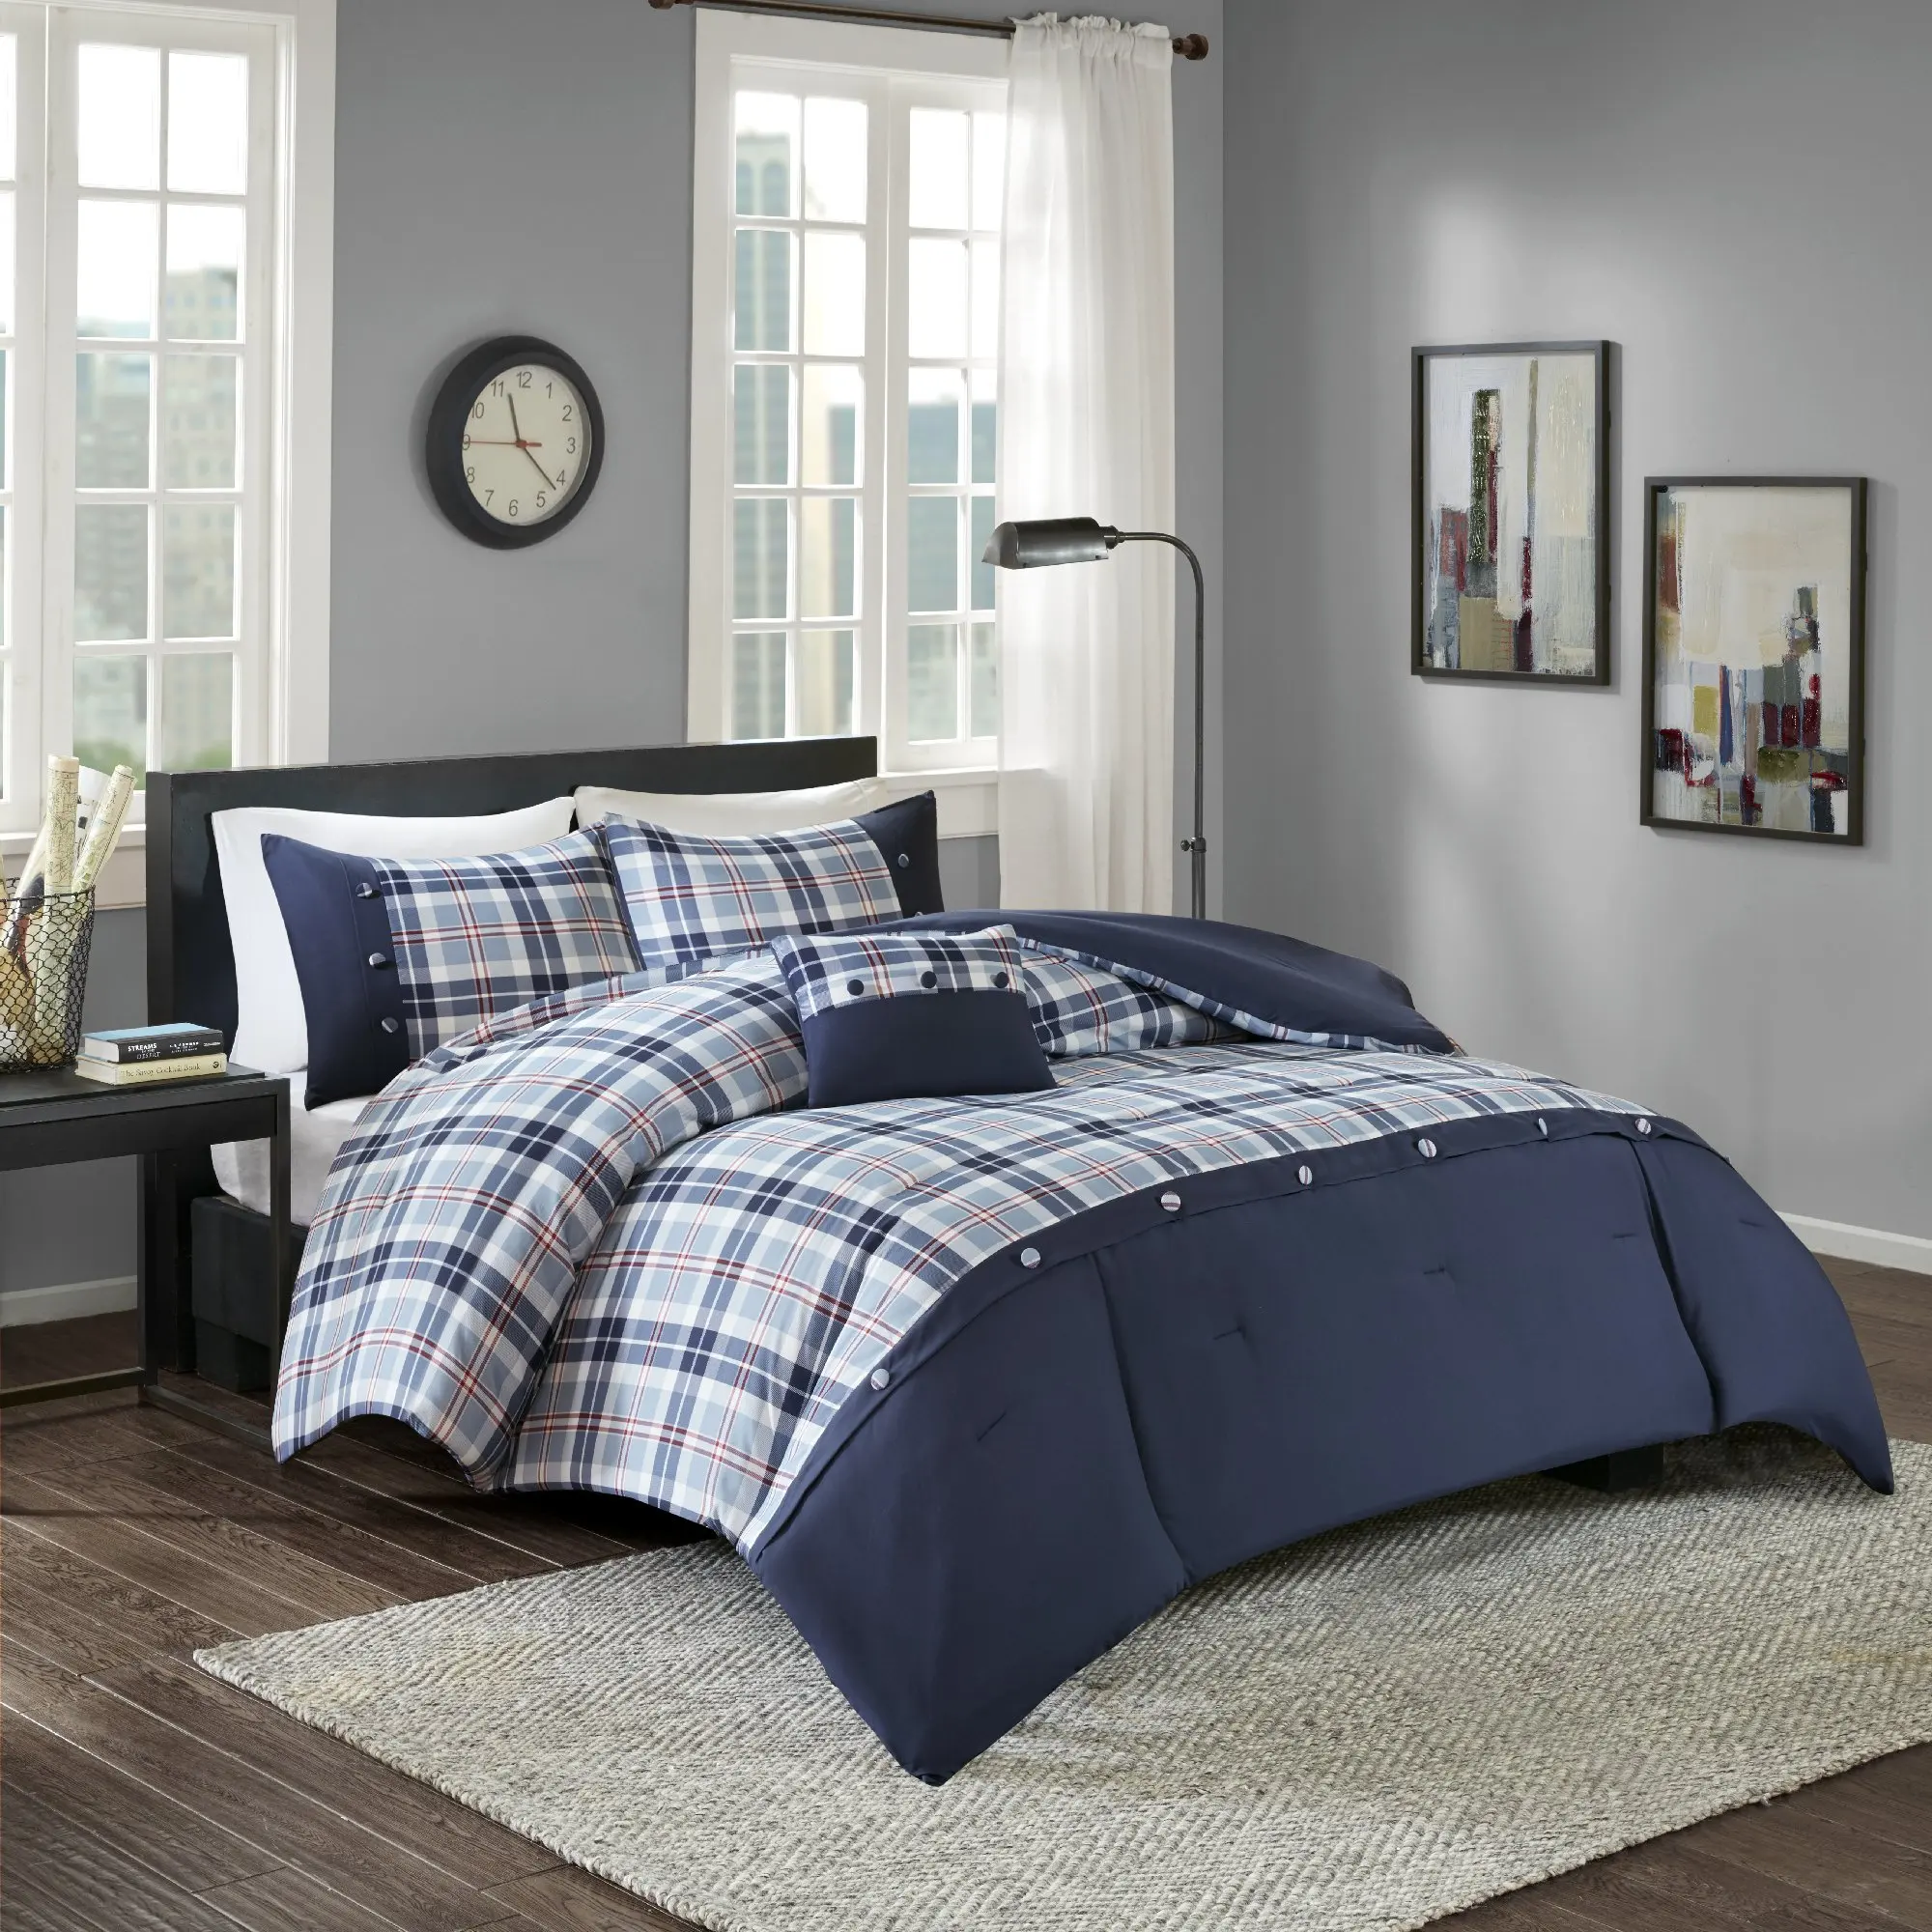 Modern Blue Plaid Bedroom Ideas for Small Space